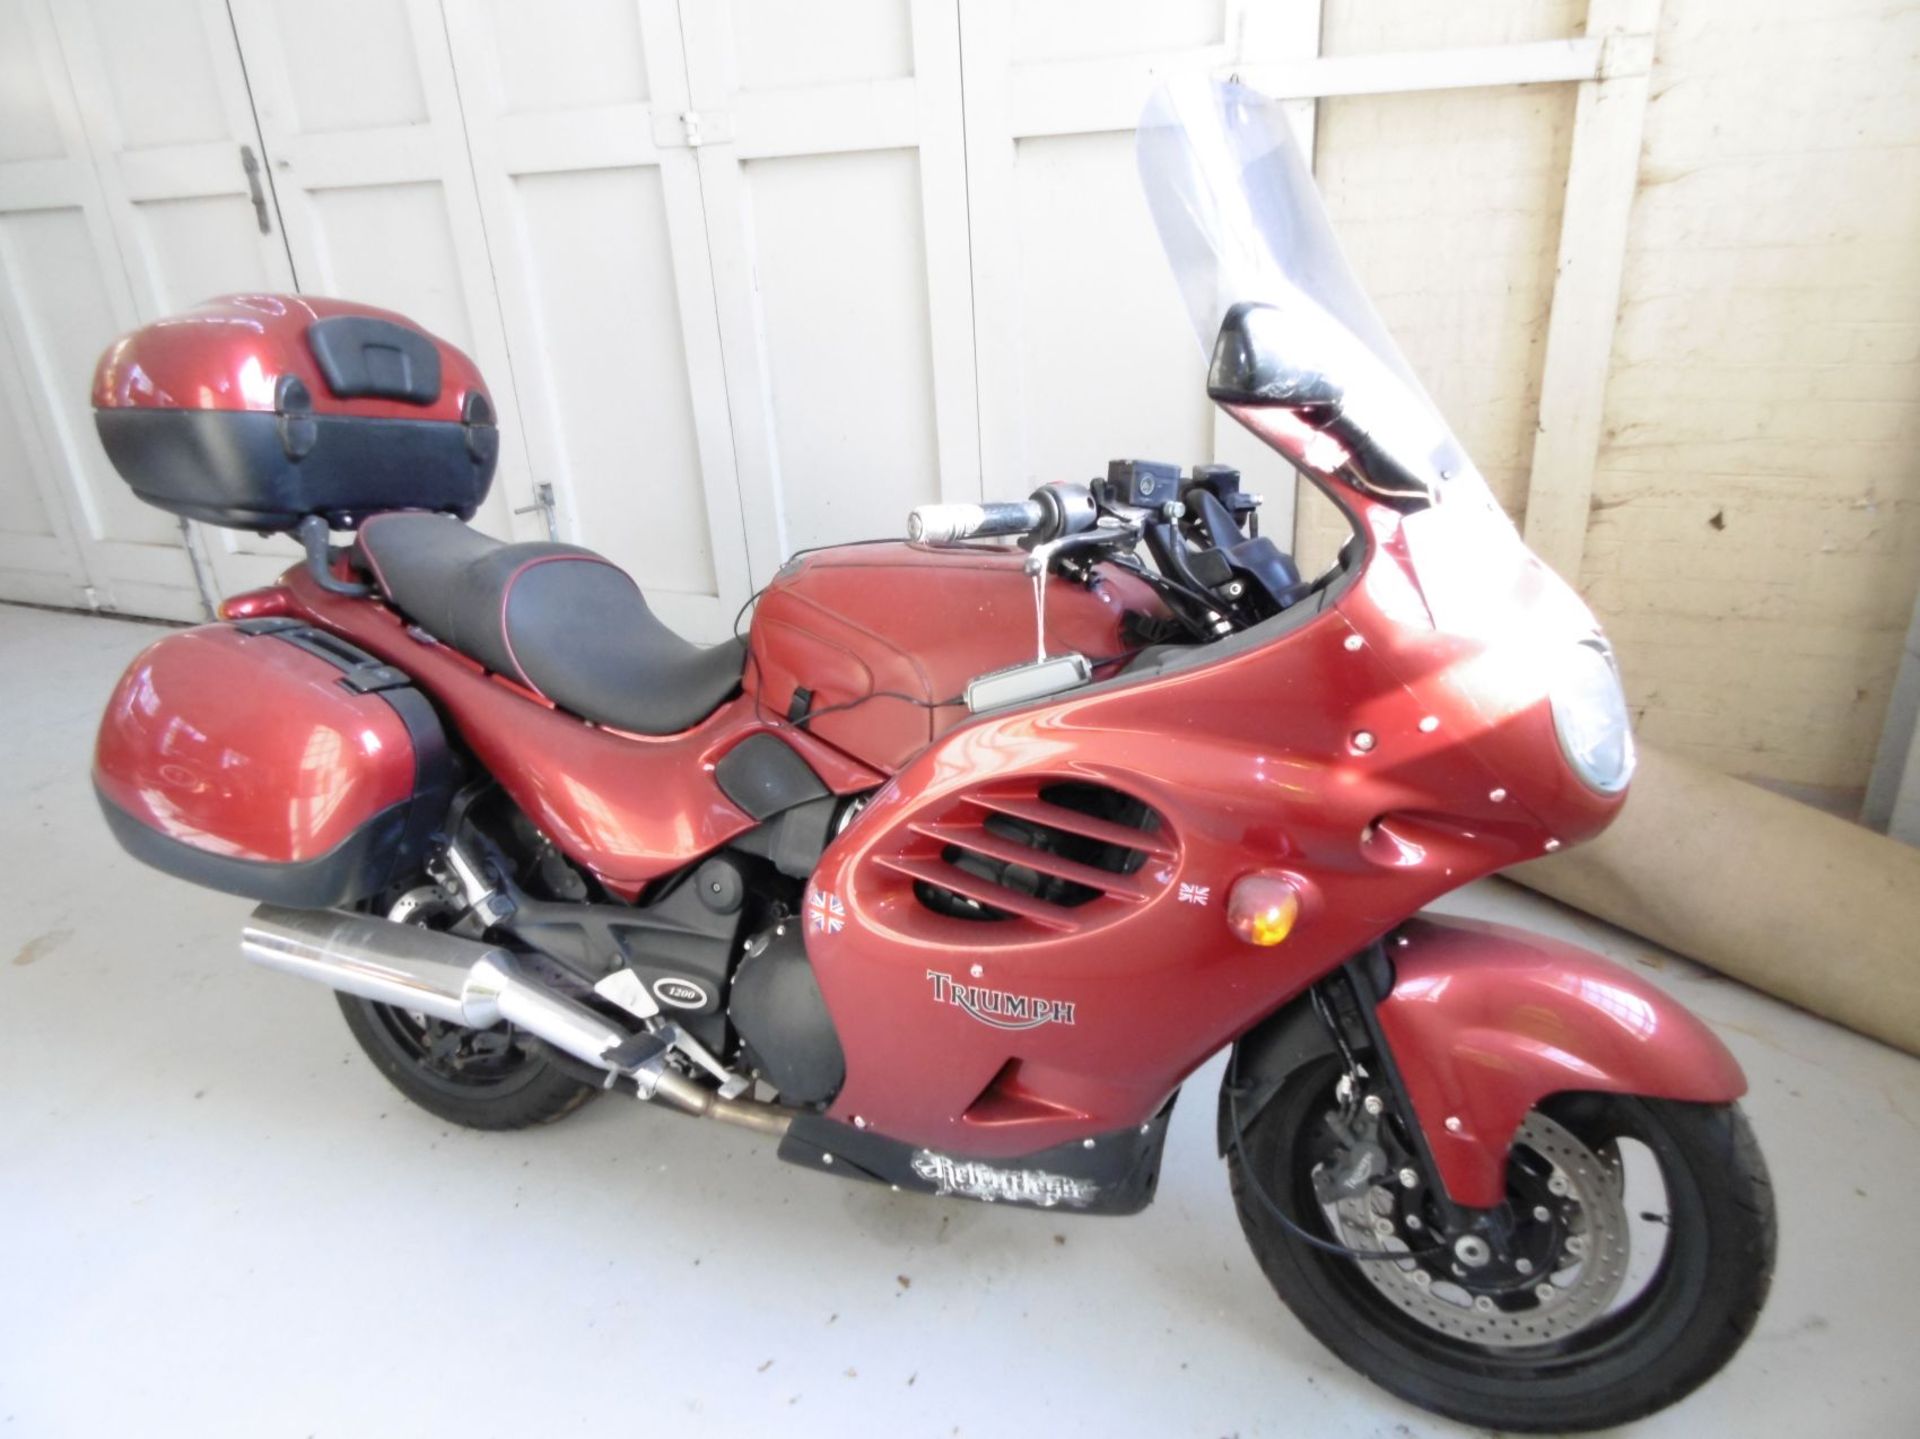 Truimph Trophy 1200cc Year man 2001 mileage 29,700 with side panniers  V5 Keys Very Good condition